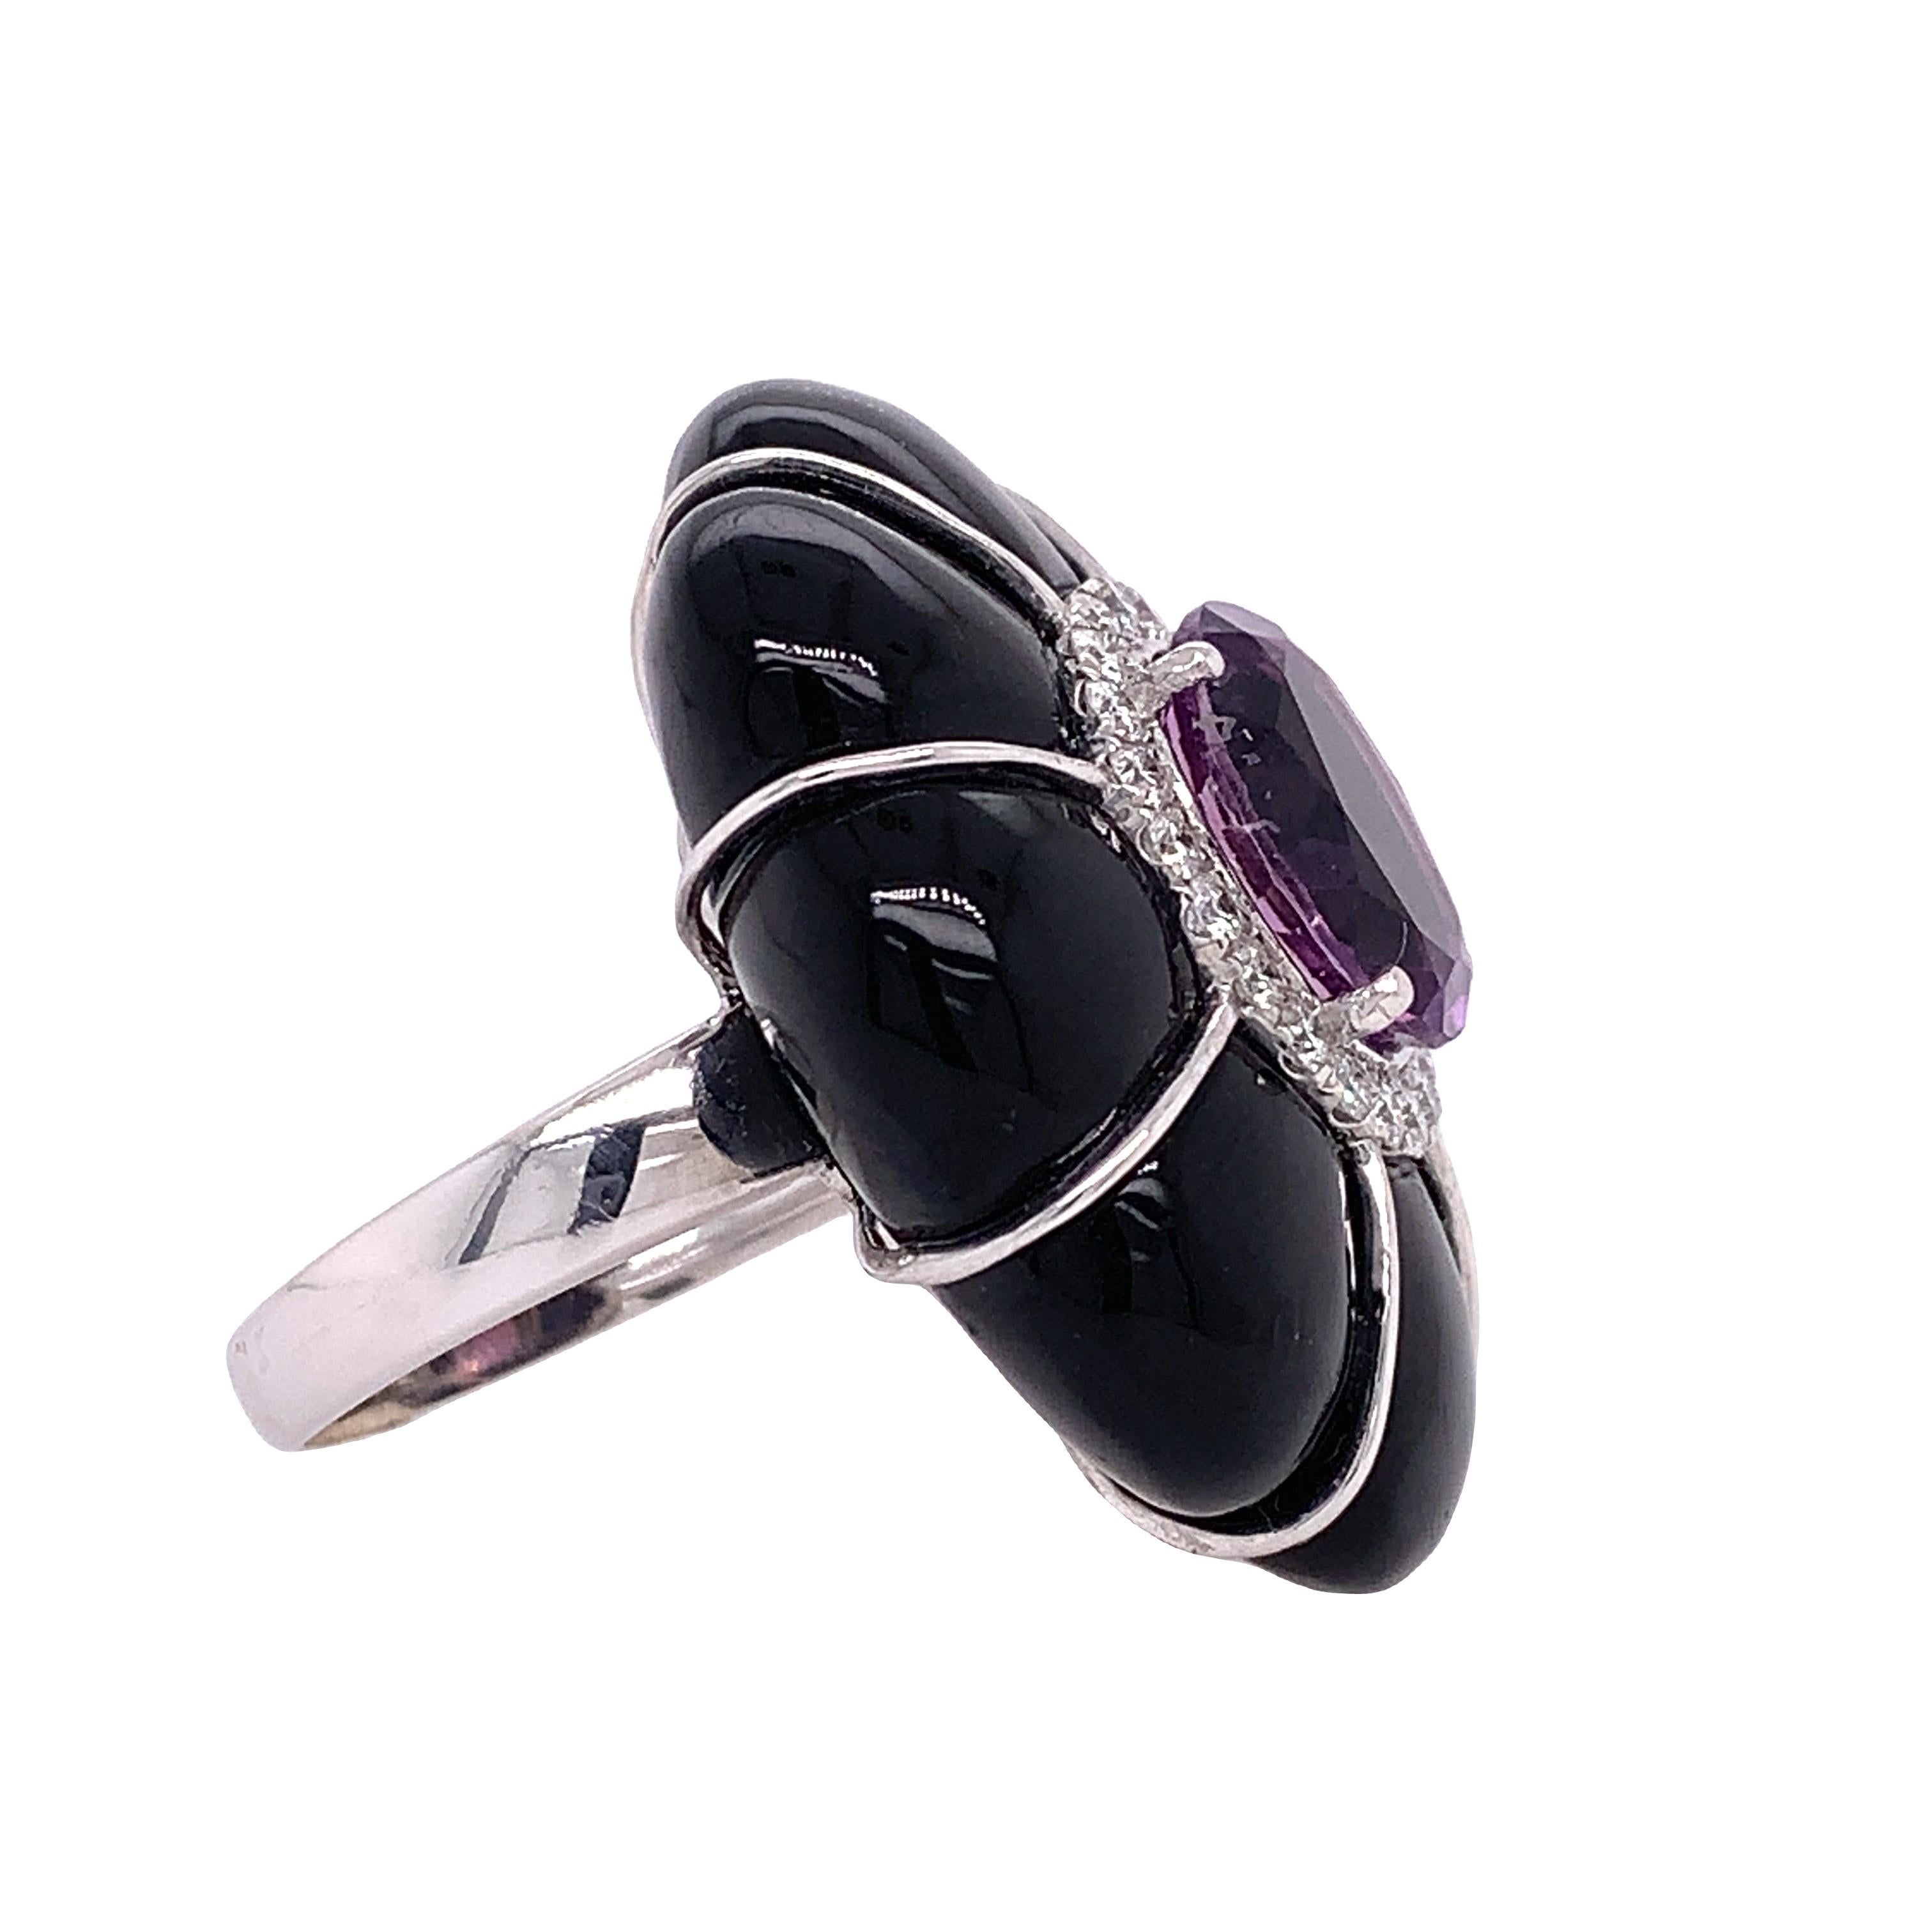 Palm beach Collection

This beautiful and alluring cocktail ring features an oval Amethyst, Black Onyx and white diamonds to complete the look. The ring is set in 18K white gold and makes for a great gift for your loved one.

Amethyst: 2.80ct total